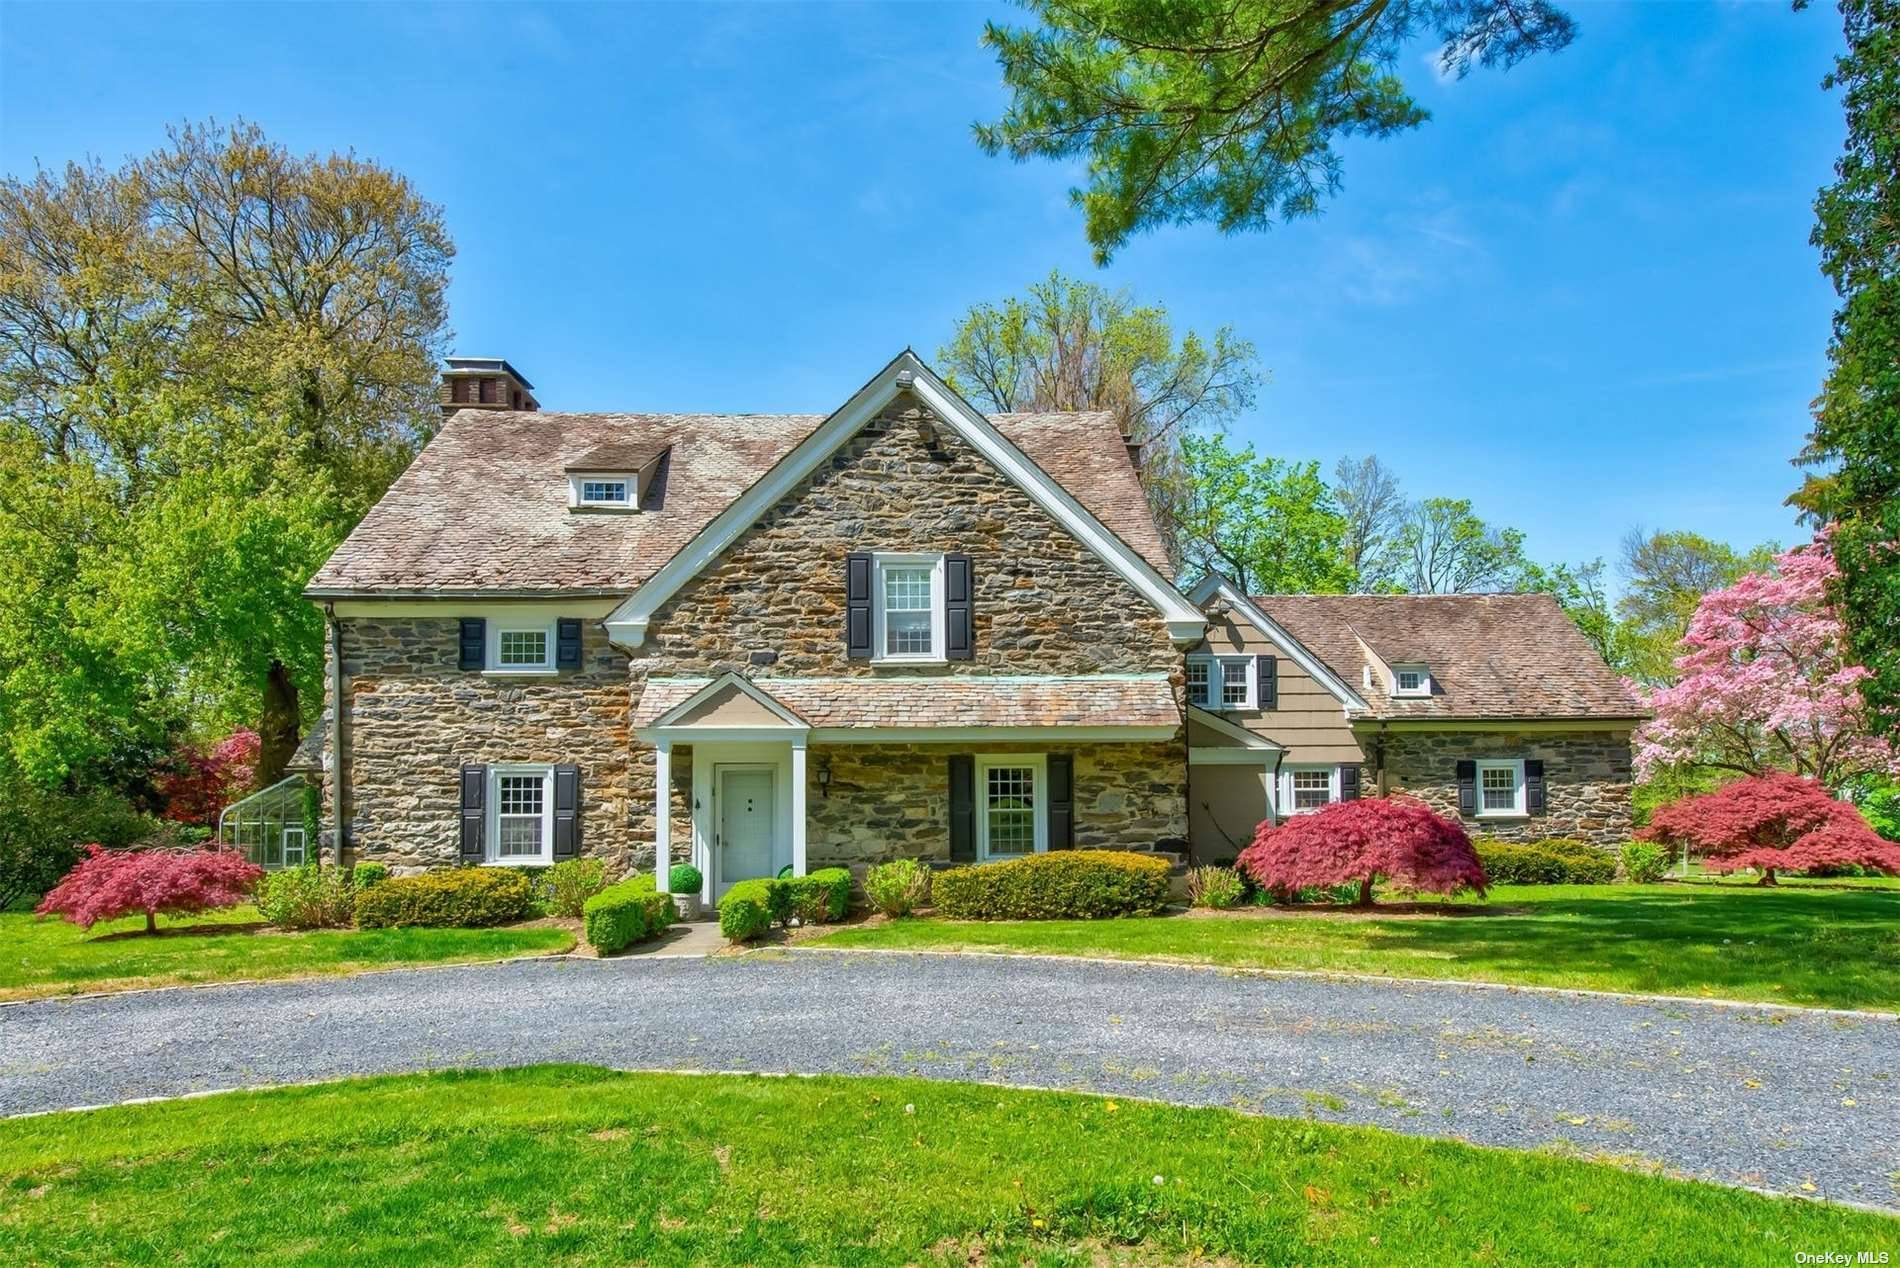 Nestled on over four acres of private lush property with verdant lawns and mature specimen trees in the village of North Hills, this gracious 7 bedroom 4.